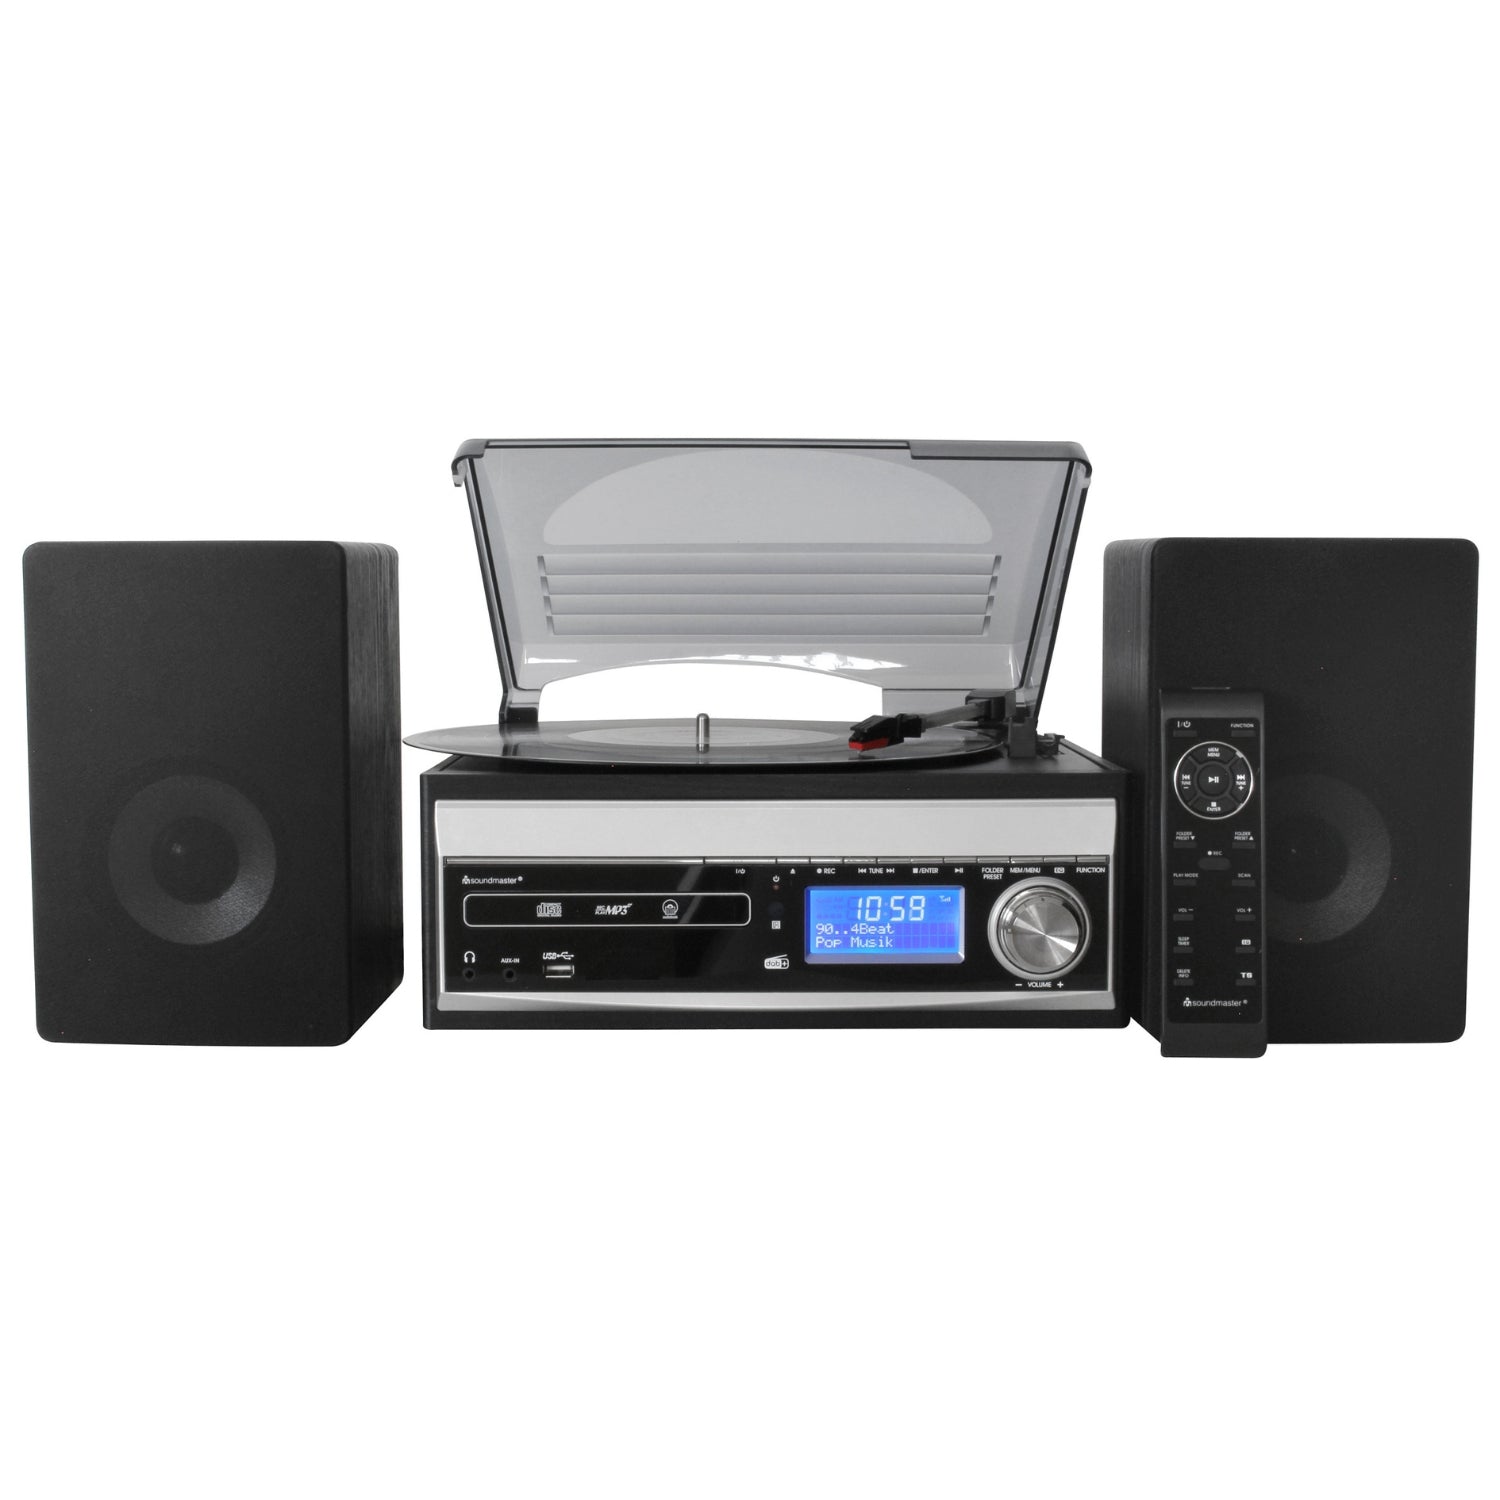 Soundmaster MCD1820SW DAB+ stereo system compact system CD player turntable USB SD encoding MP3